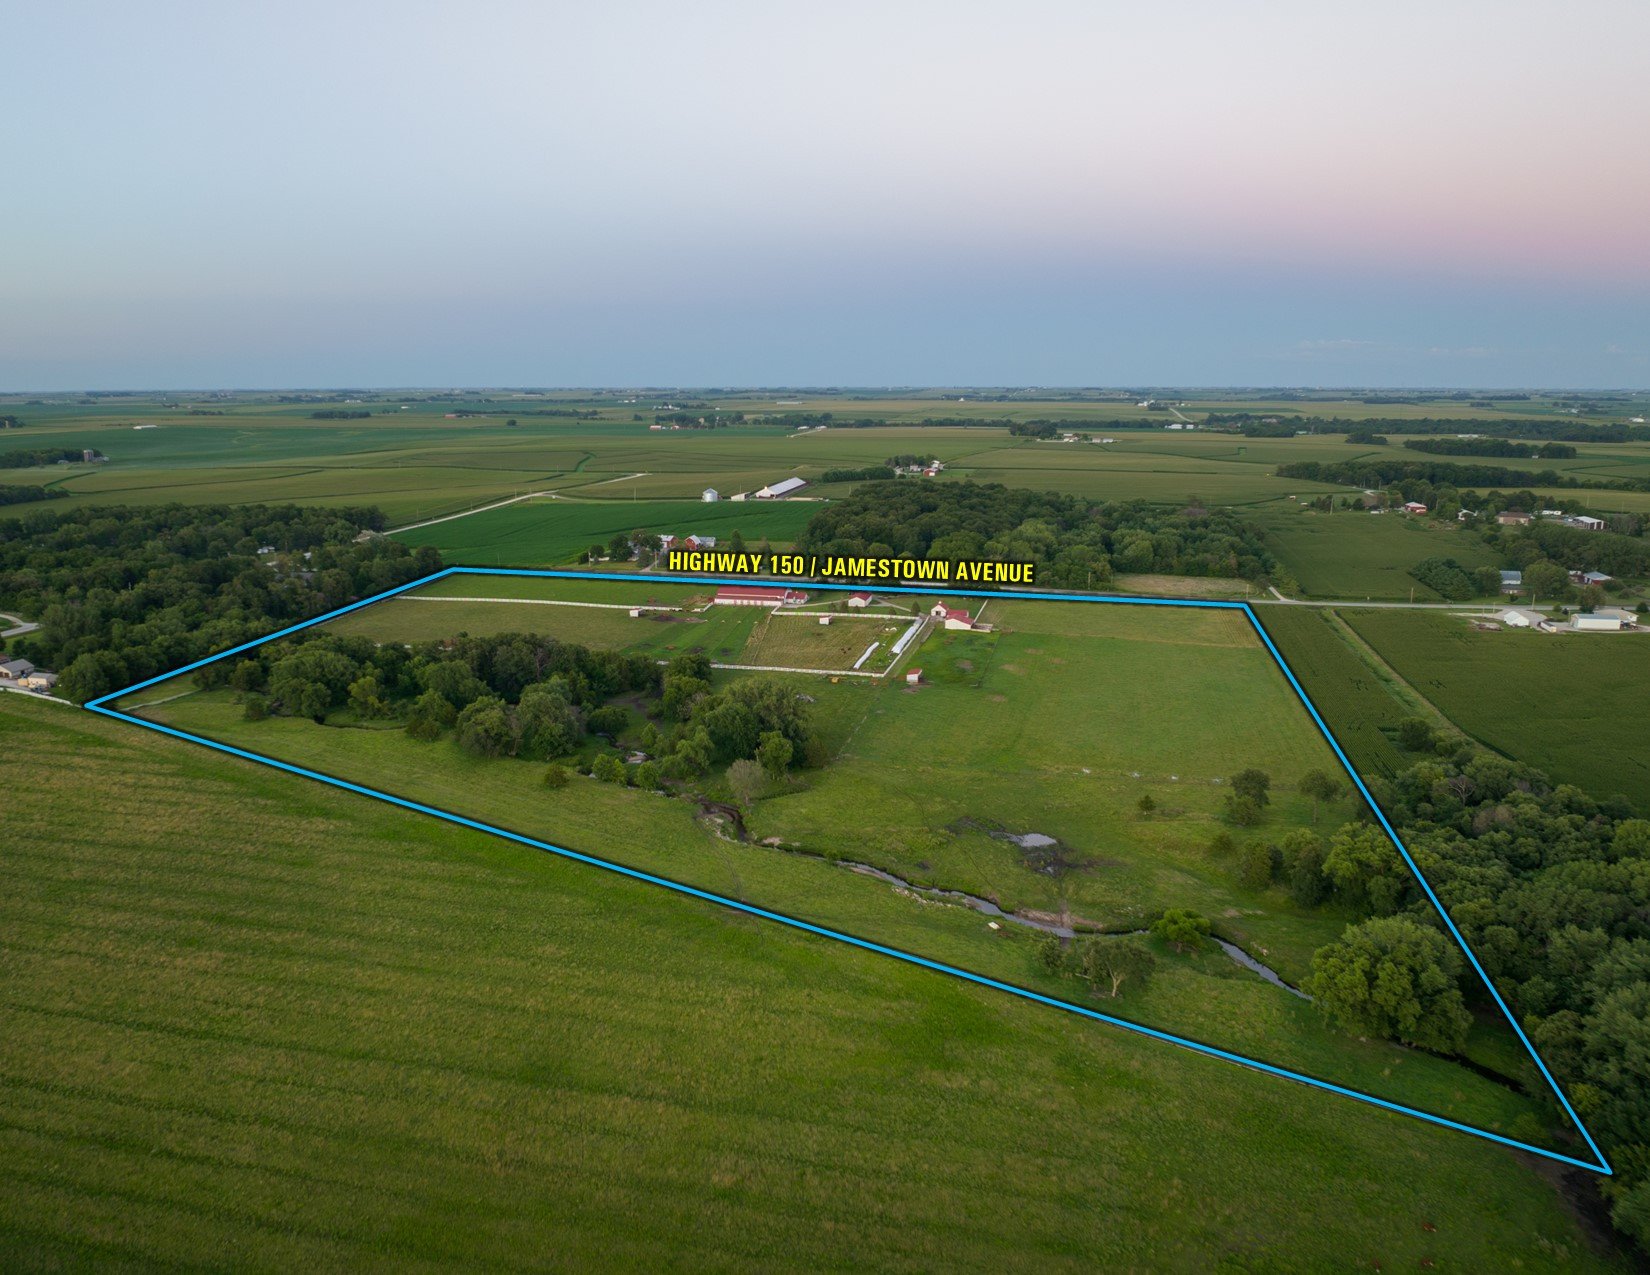 residential-land-buchanan-county-iowa-48-acres-listing-number-16335-Jon and Crystal Blin, Buchanan Co - West to East Property Outline-1.jpg